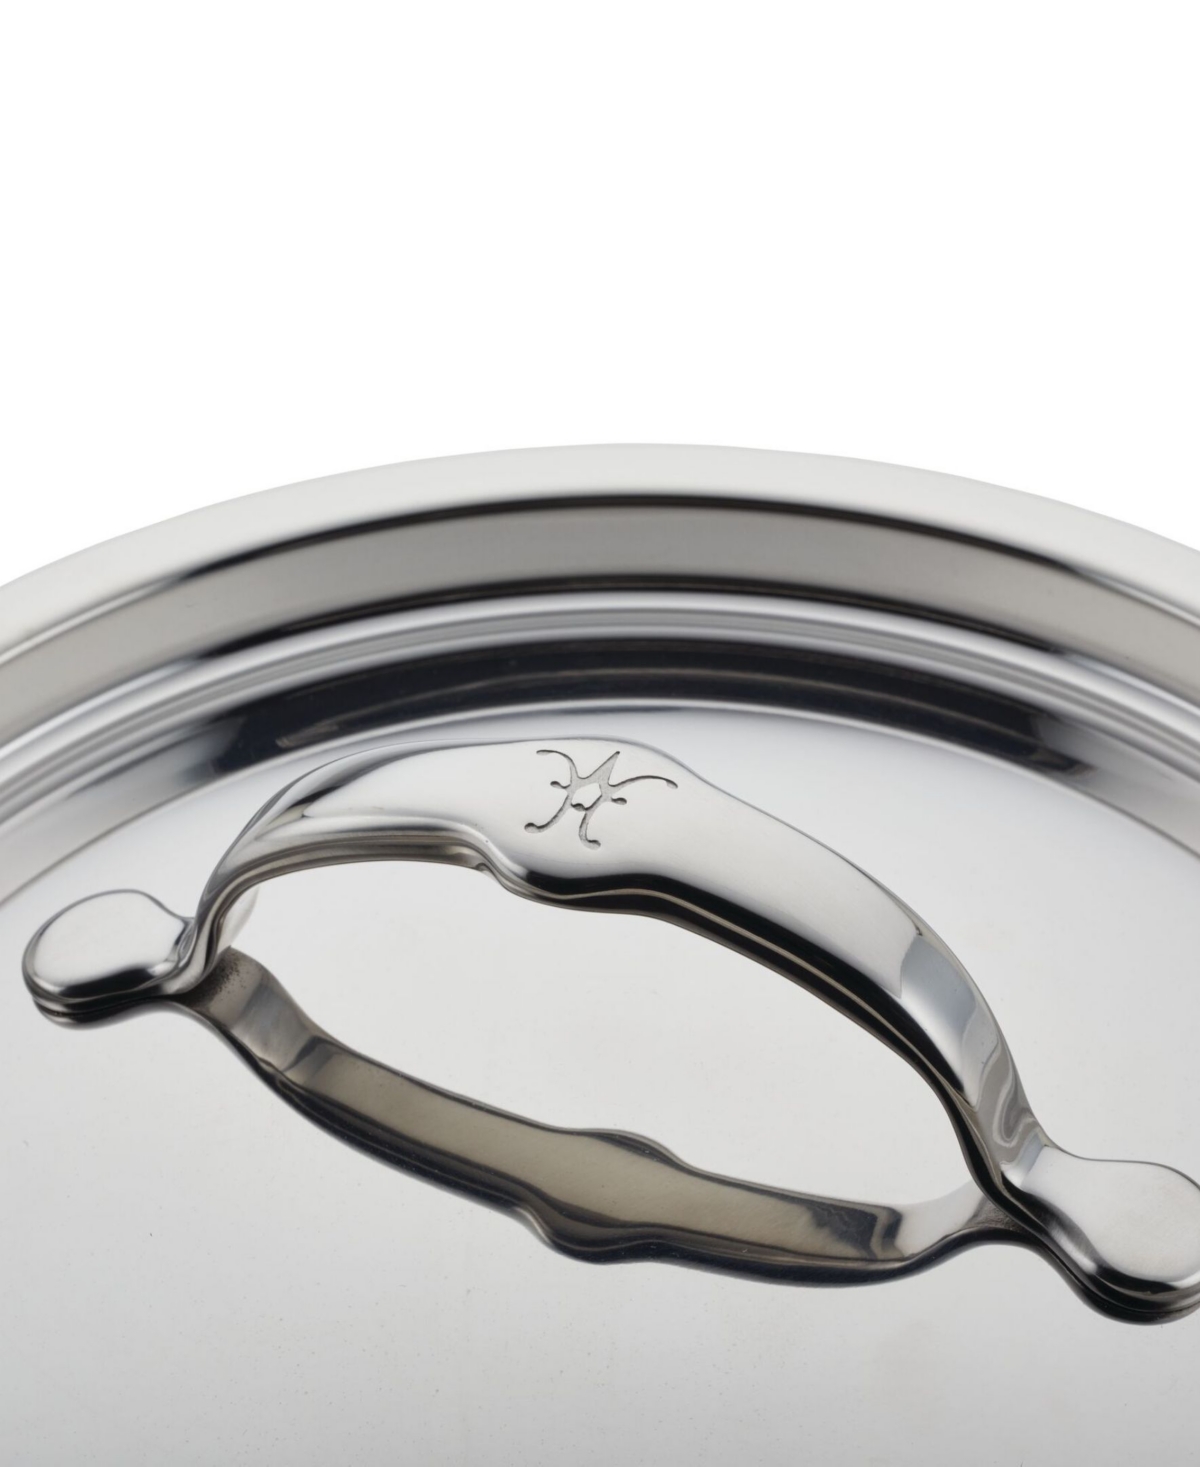 Shop Hestan Provisions Stainless Steel 11" Lid